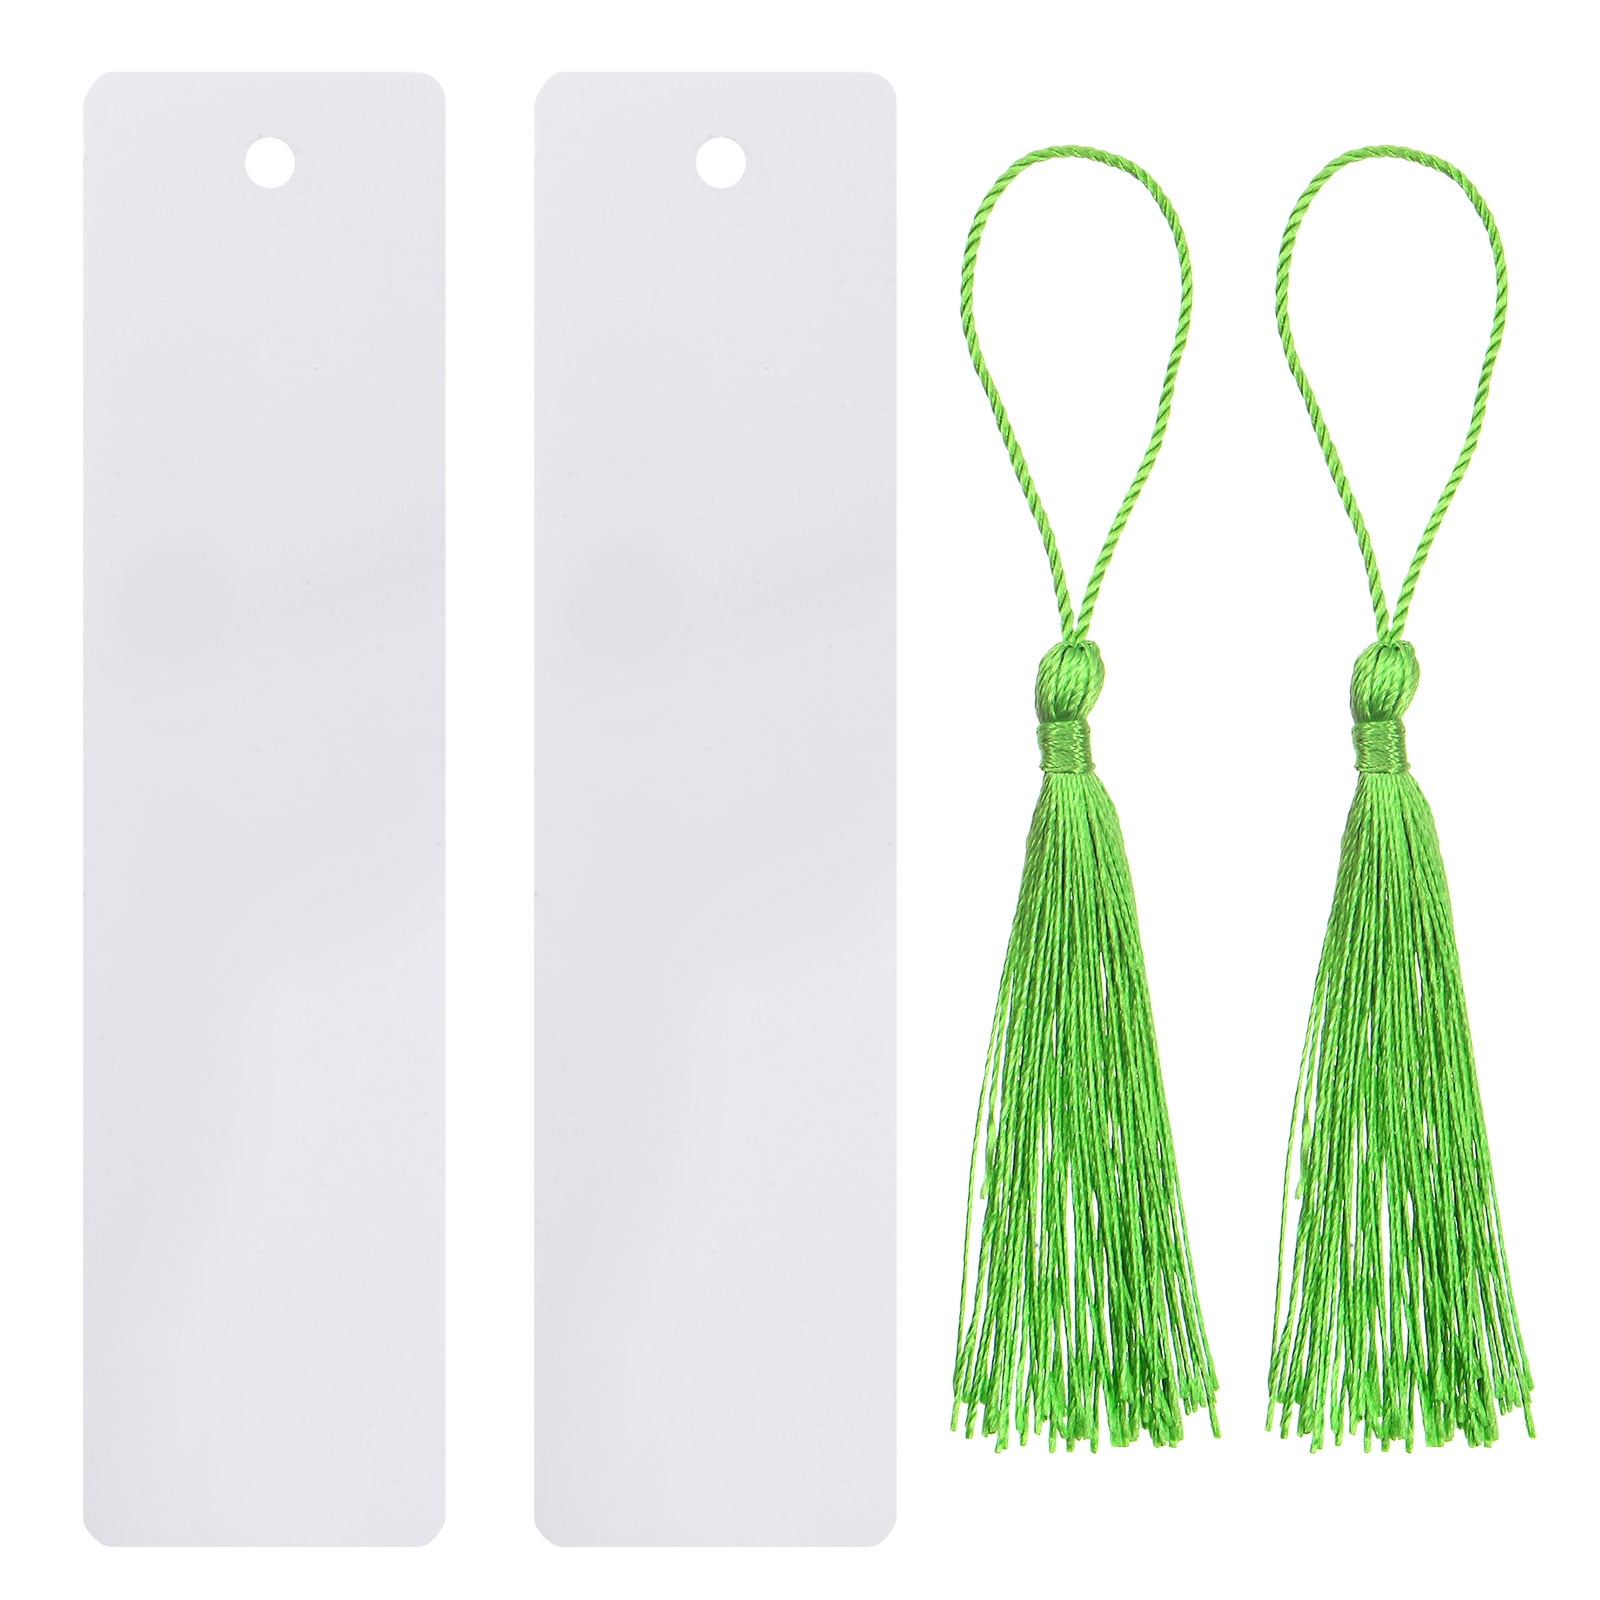 Trade wholesale suppliers Rayon style Bookmark tassel Bottle Green pack